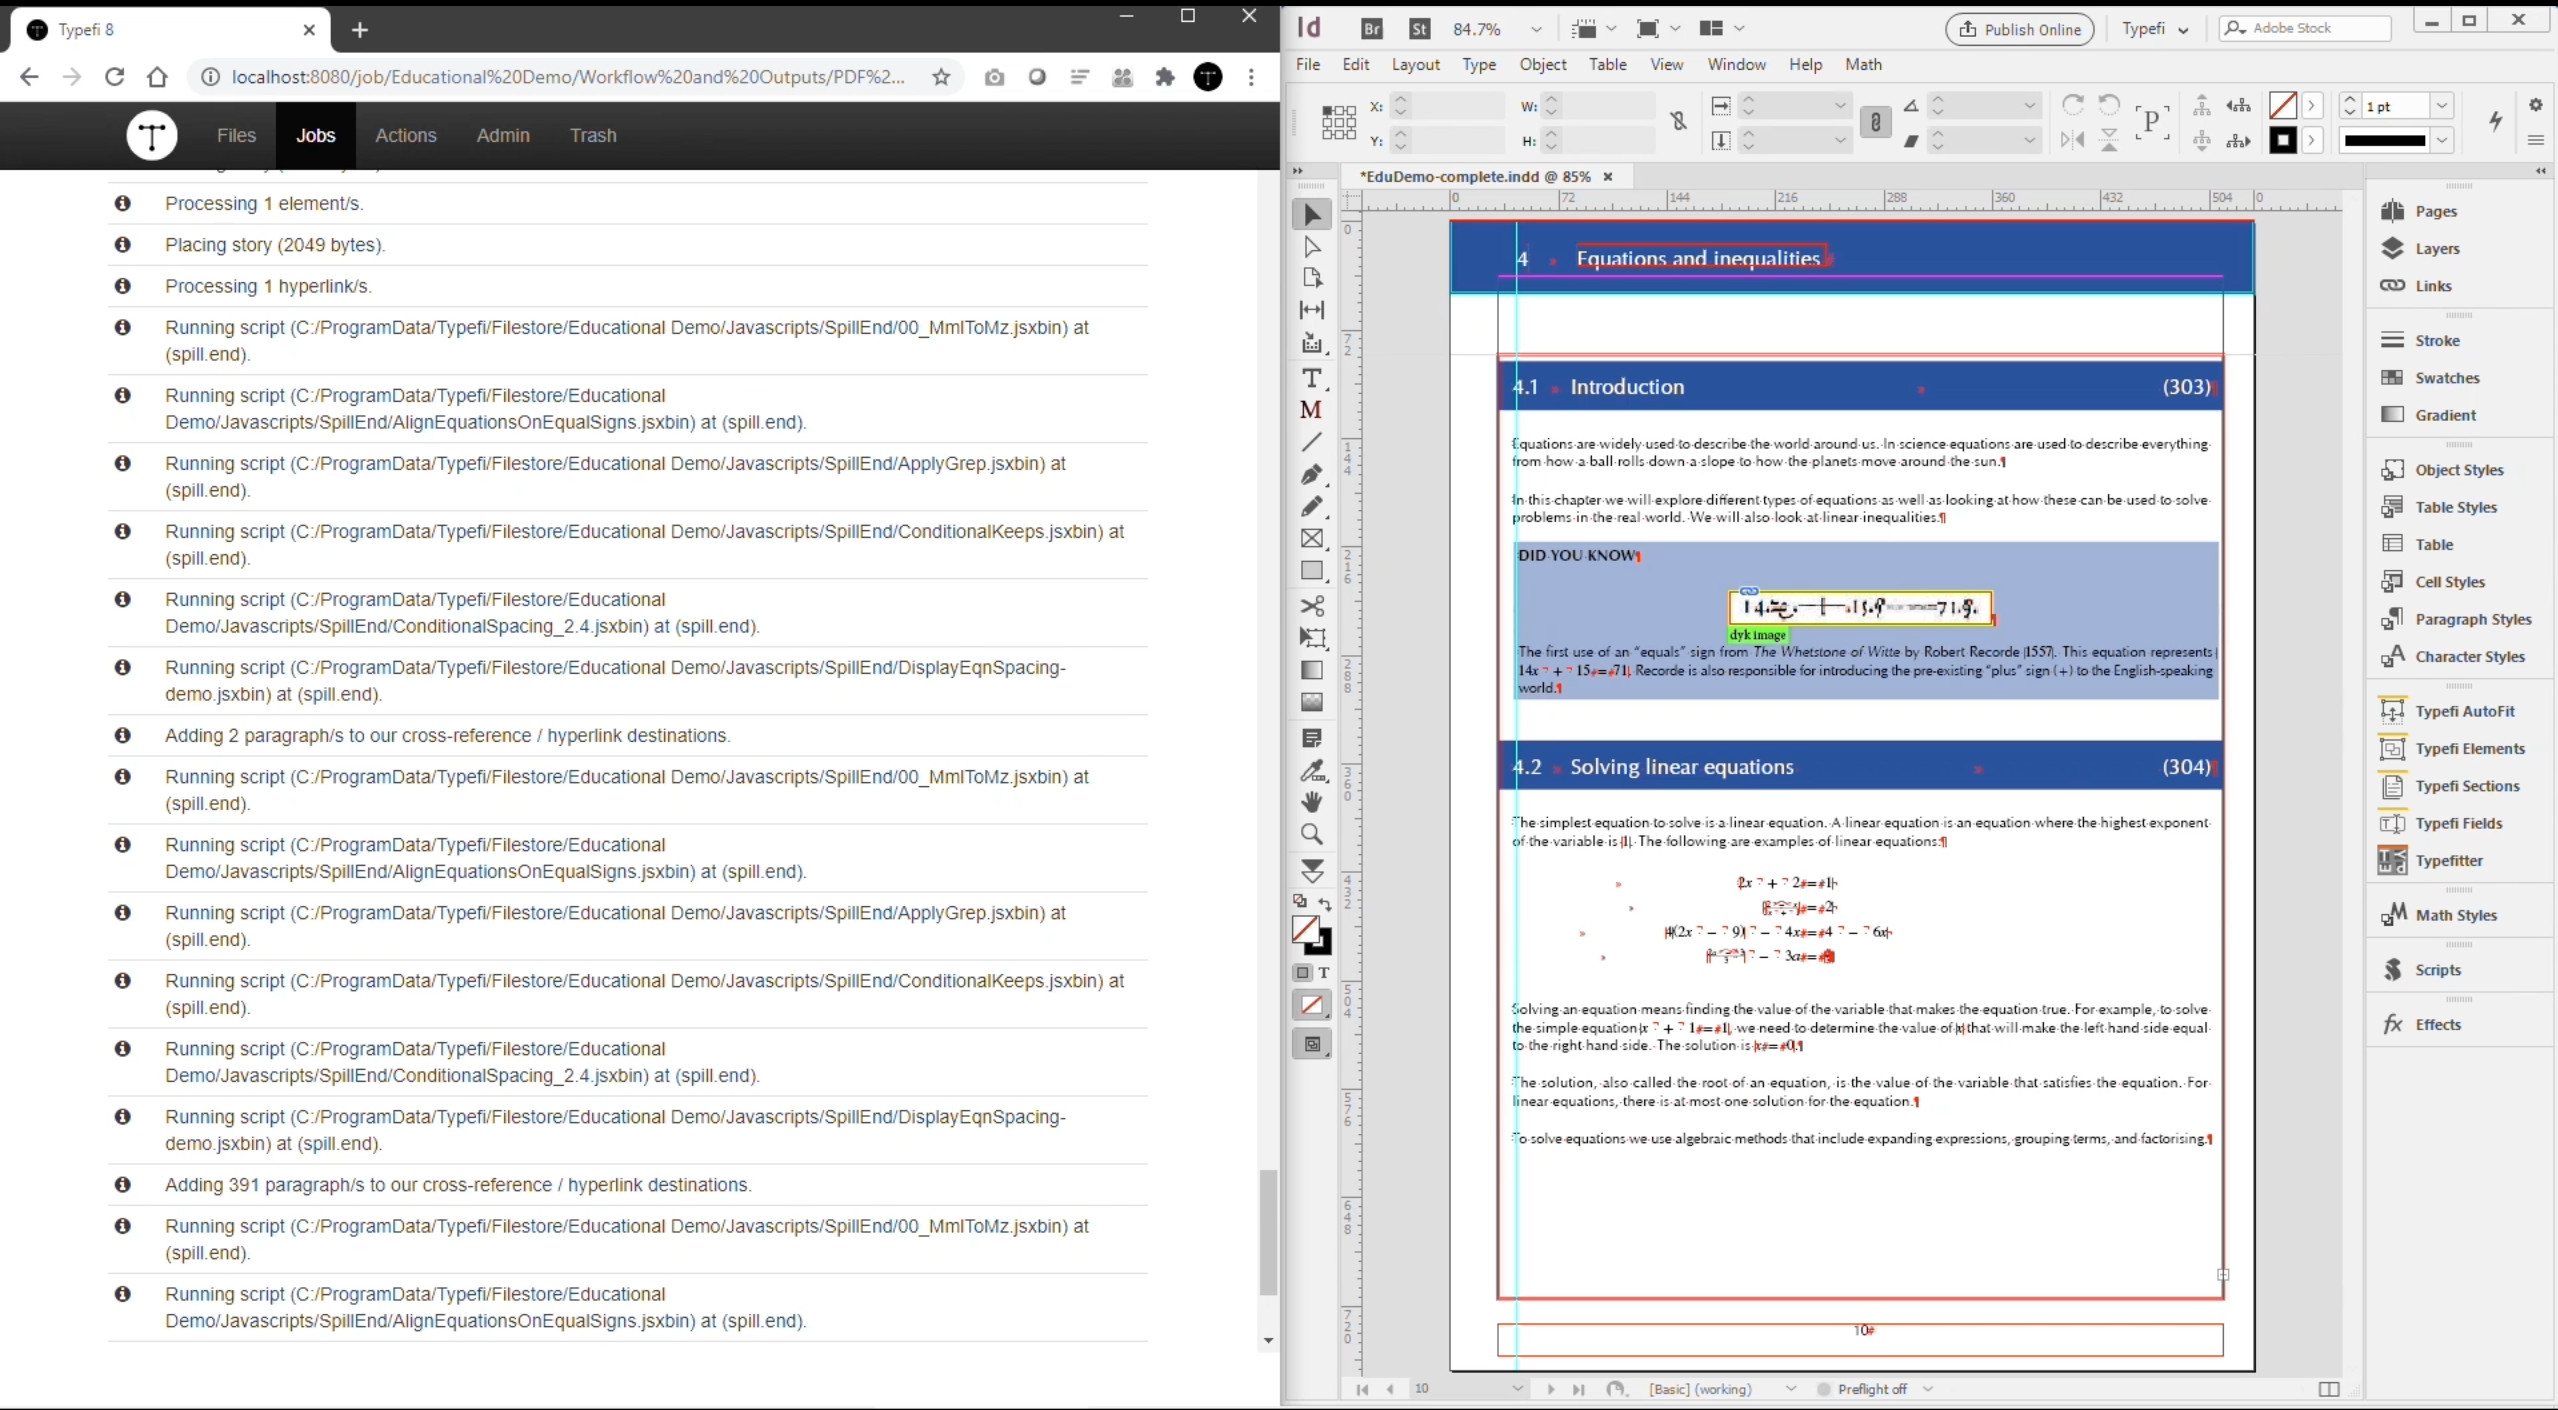 One window open with Typefi workflow interface and all tasks complete, and second window open with working InDesign file and MathML